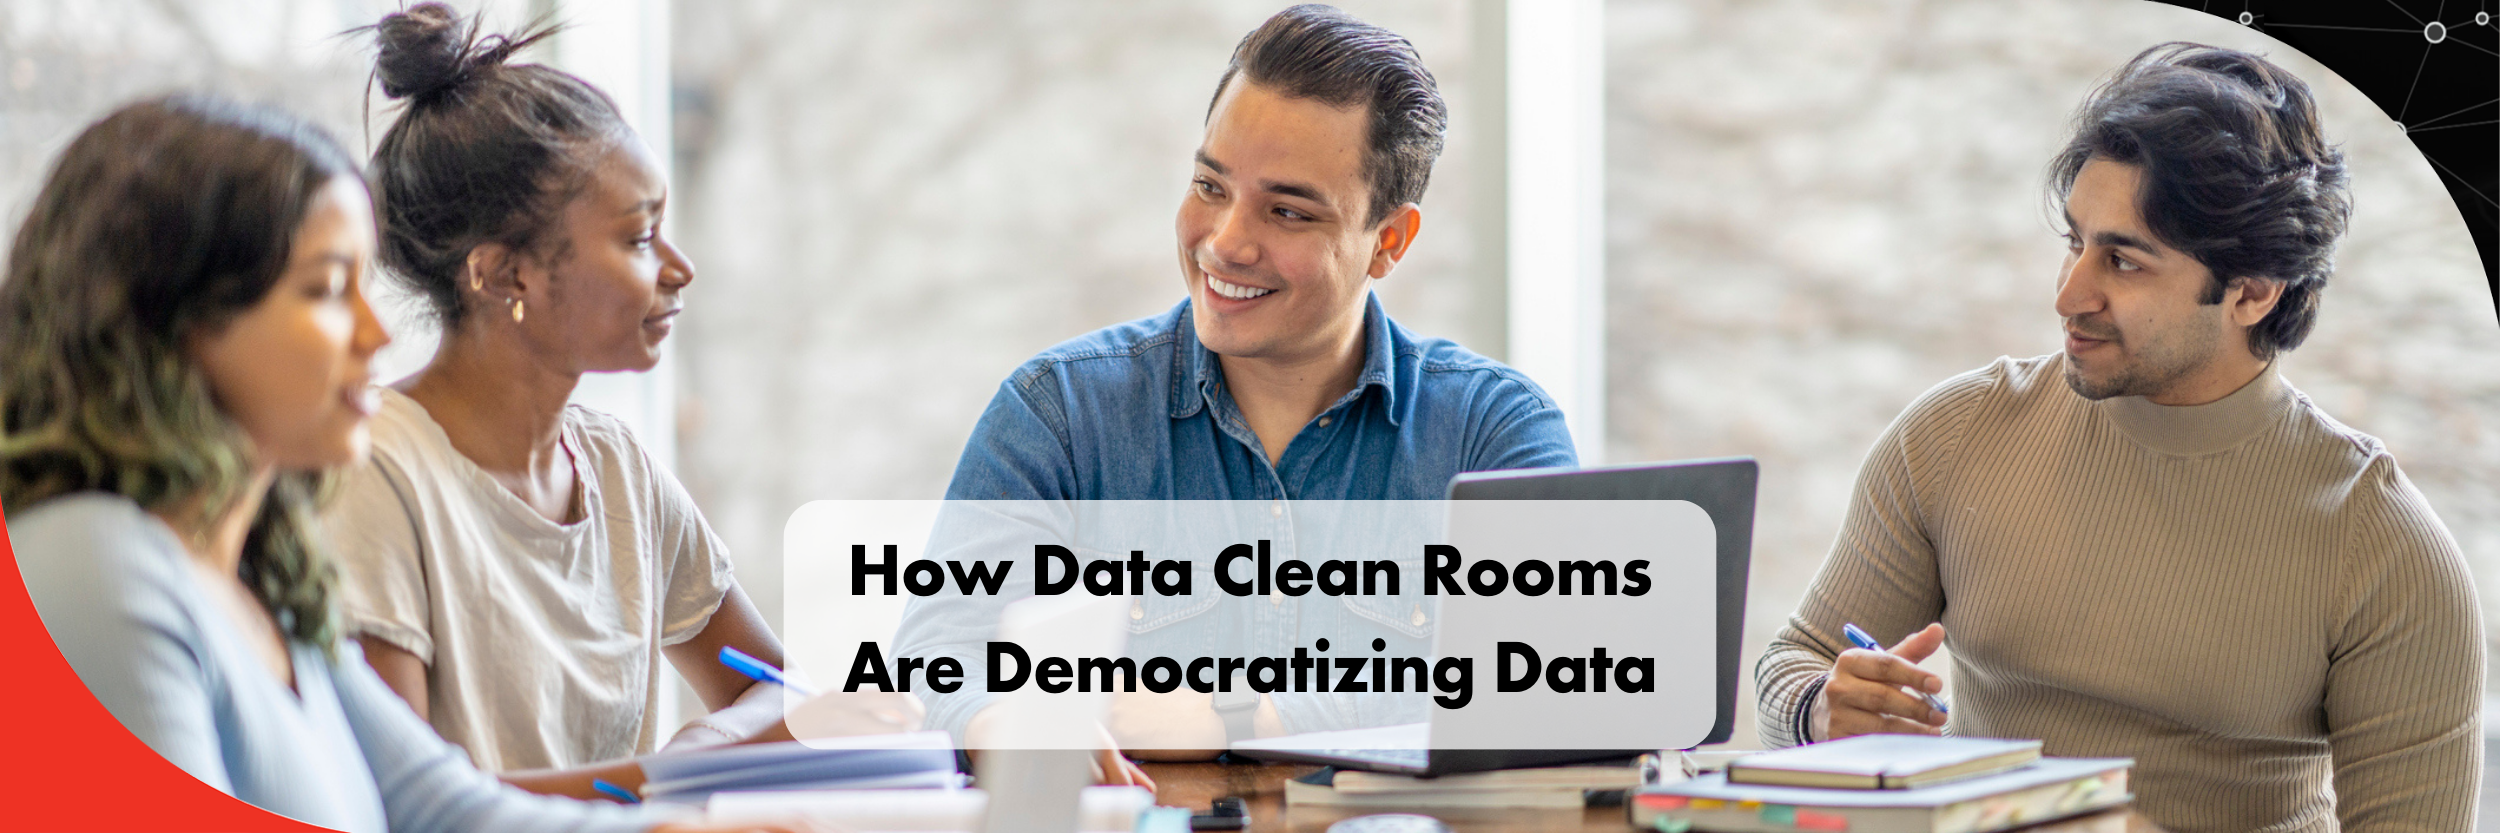 State of Data Town Hall: Data Clean Rooms